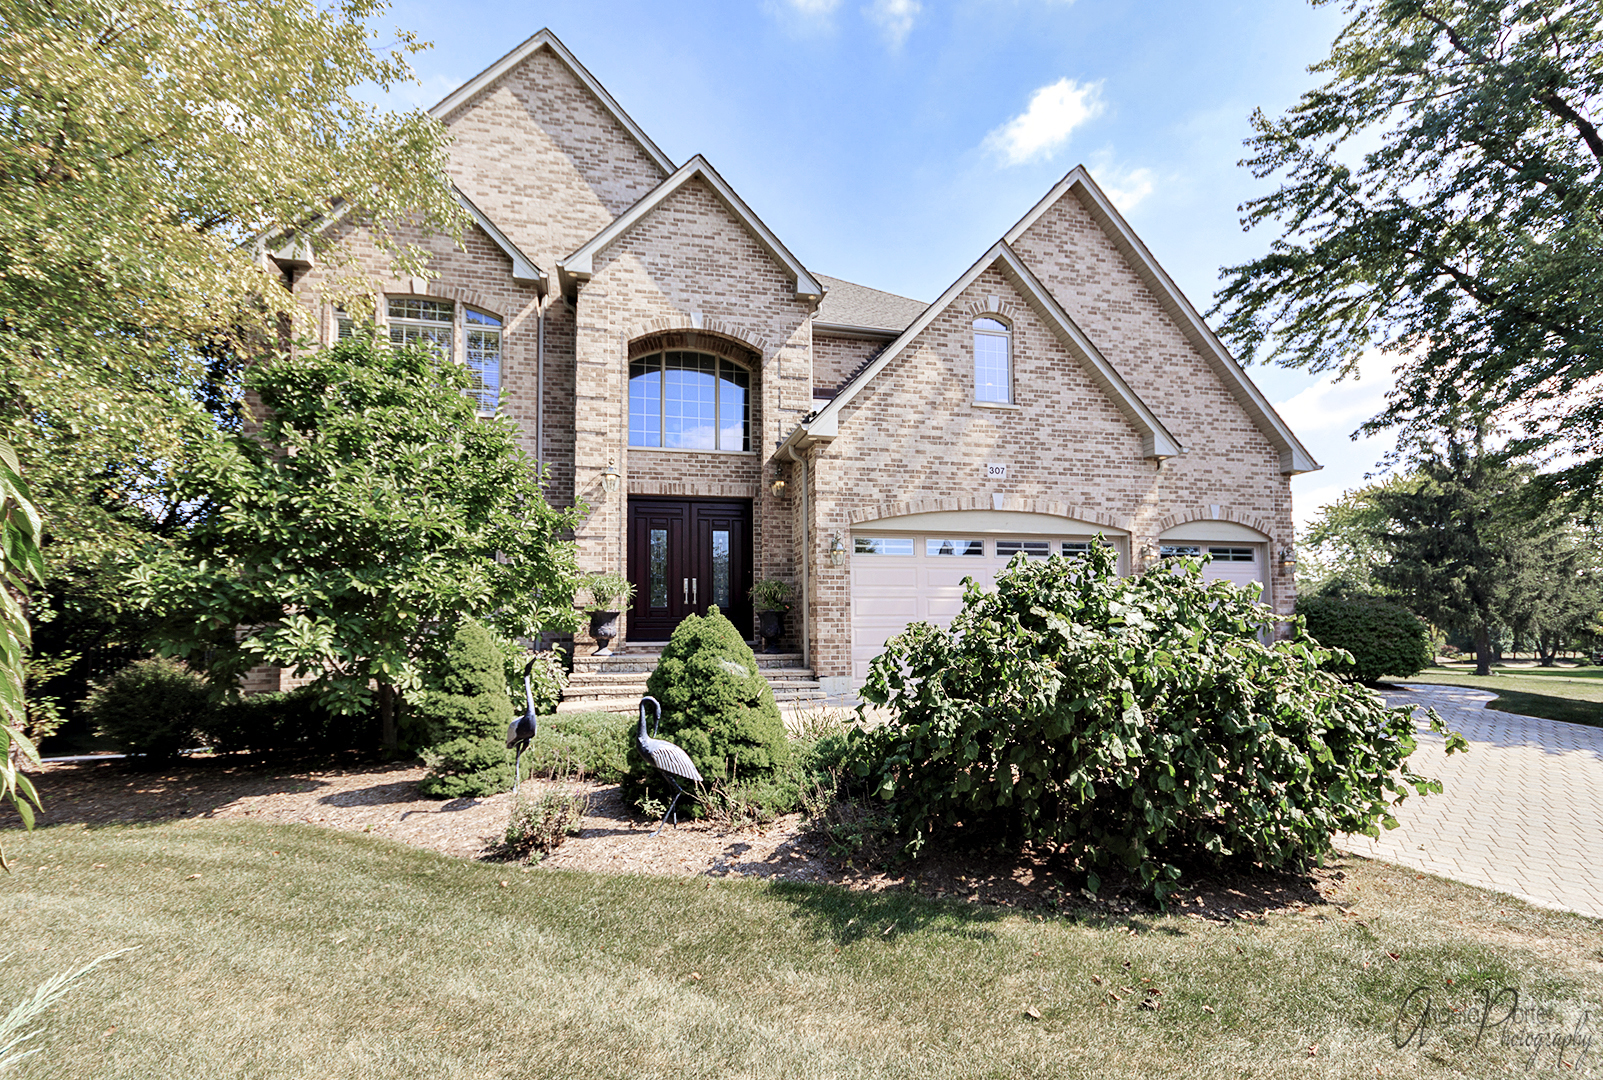 Bloomingdale IL Homes for Sale - Bloomingdale Real Estate | Bowers Realty Group